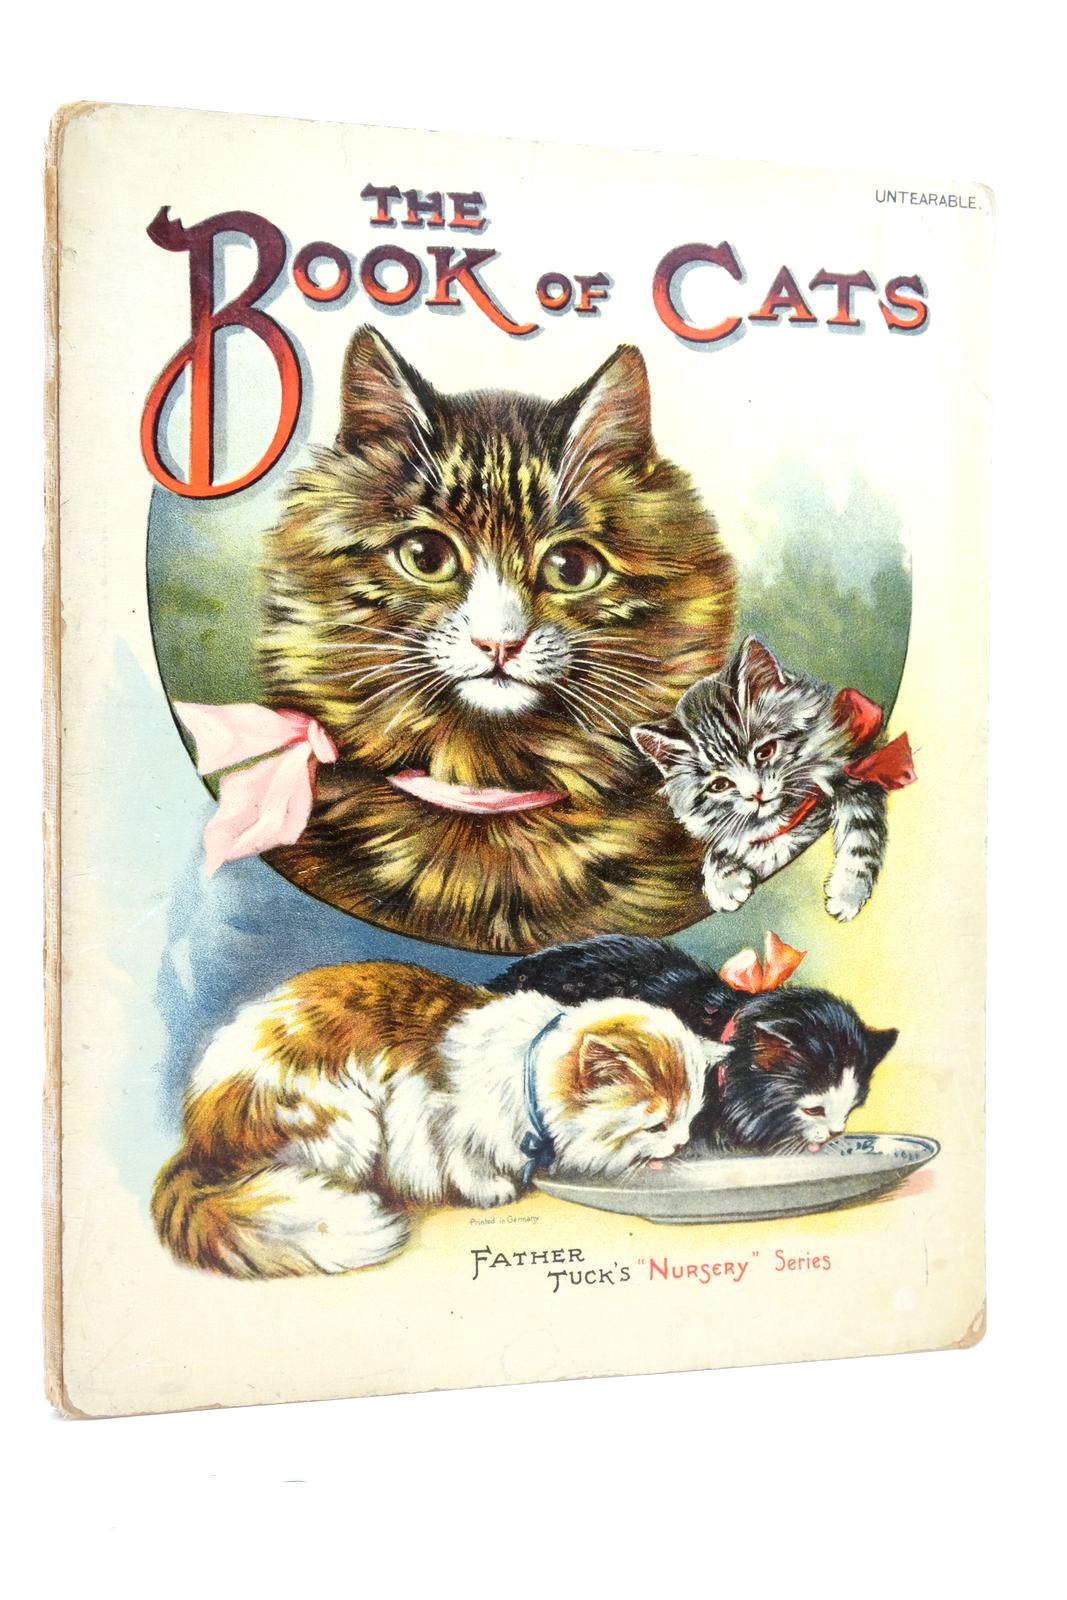 Photo of THE BOOK OF CATS published by Raphael Tuck &amp; Sons Ltd. (STOCK CODE: 2137115)  for sale by Stella & Rose's Books